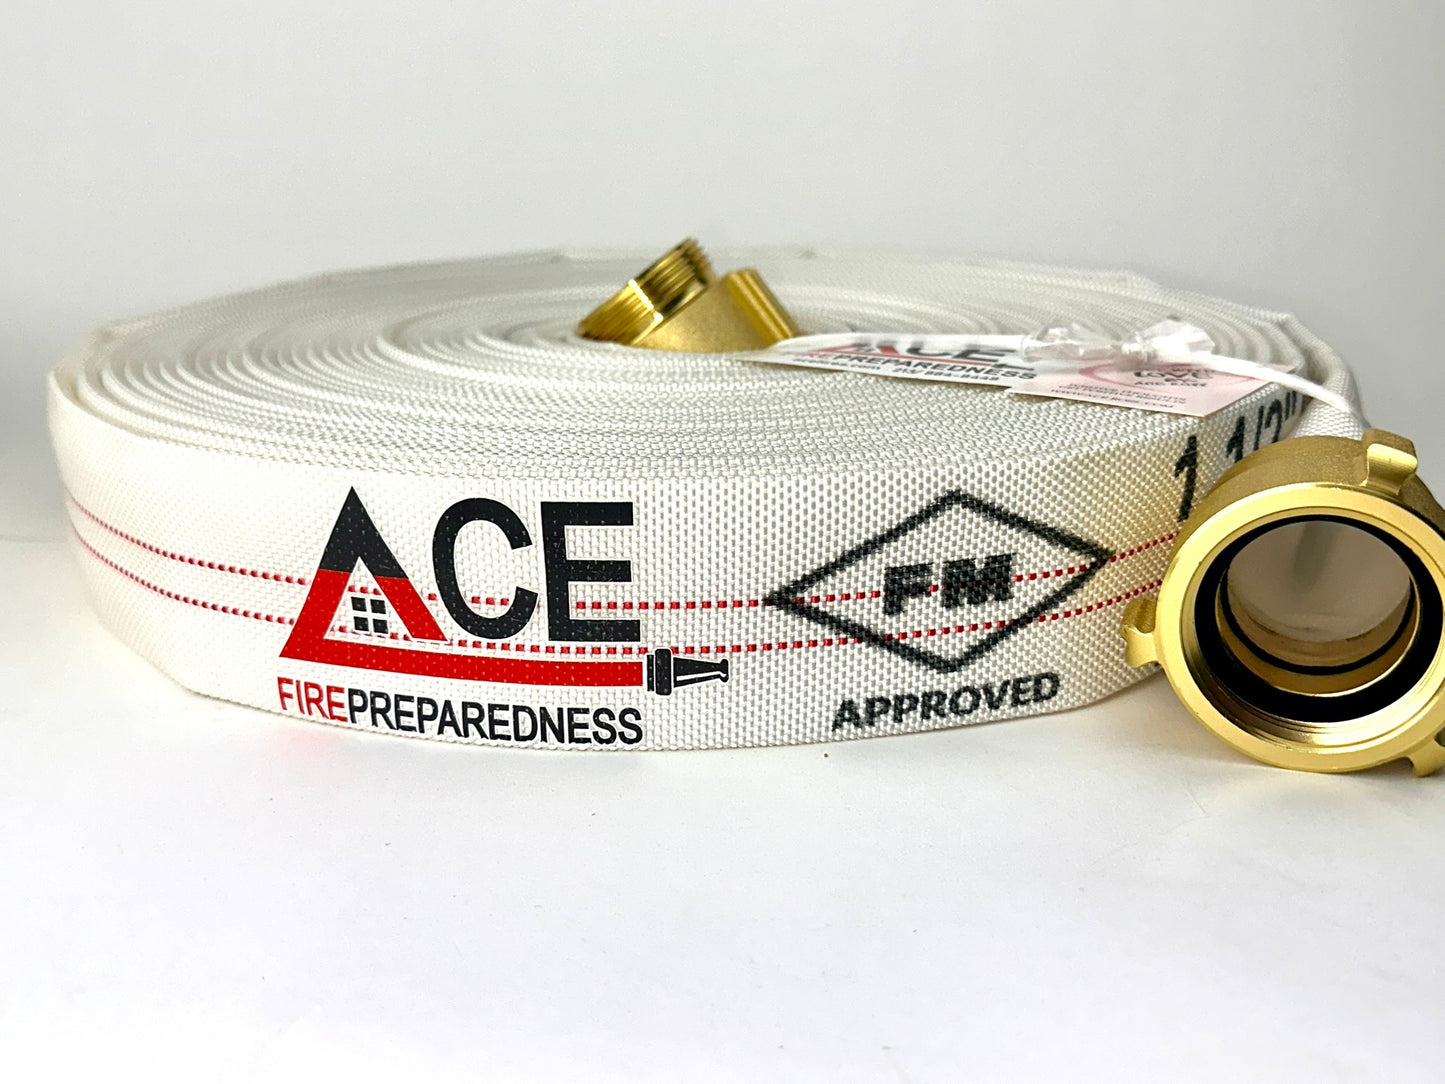 Fire Hose (1 pack), Coiled, Brass-Plated Aluminum, 75' x 1.5" TPU Lining (FM Approved)